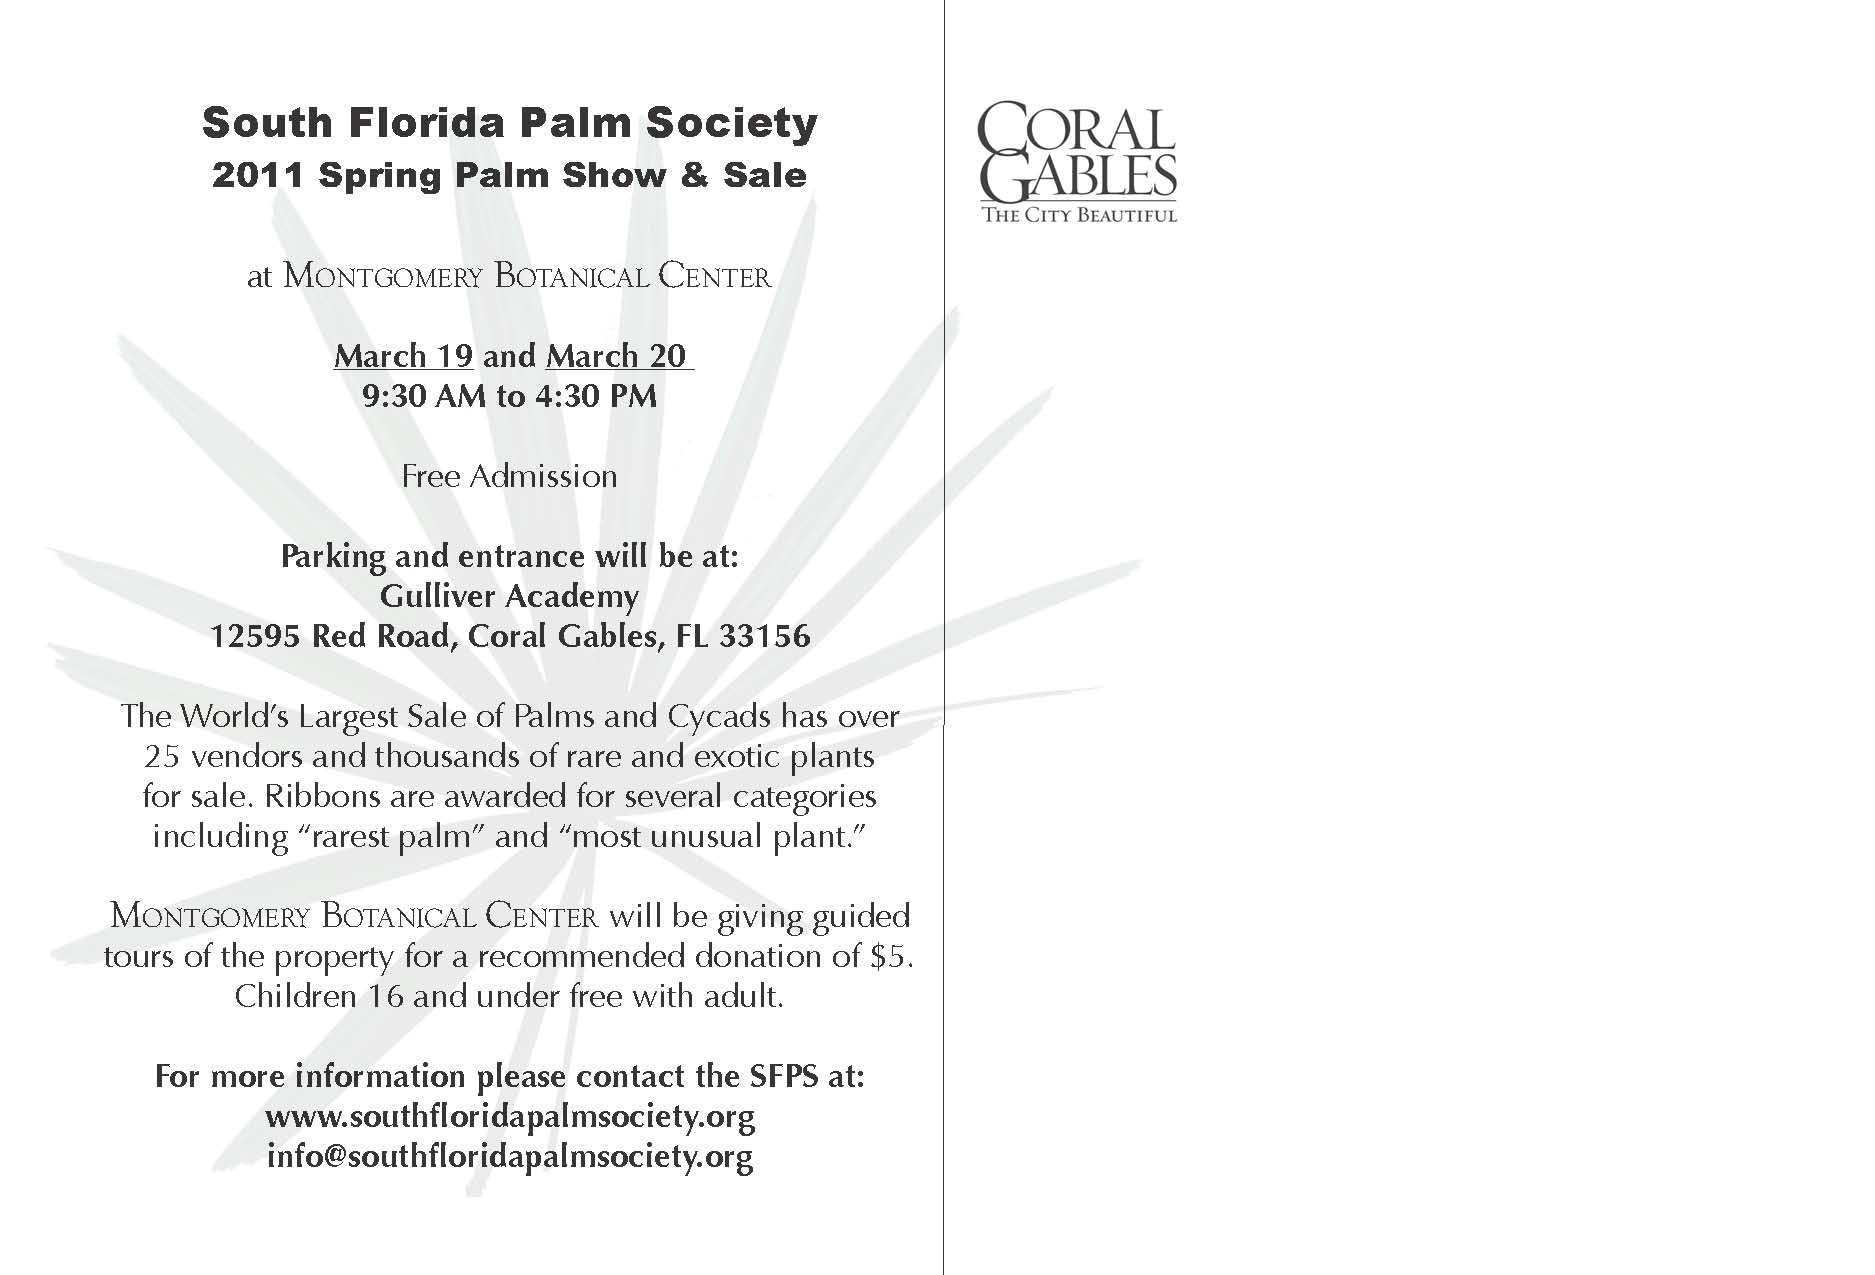 The Palm Society Plant Sale is March 19 and 20, 2011. Free admission. The world's largest sale of palms and cycads has over 25 vendors and thousands of rare and exotic plants for sale.